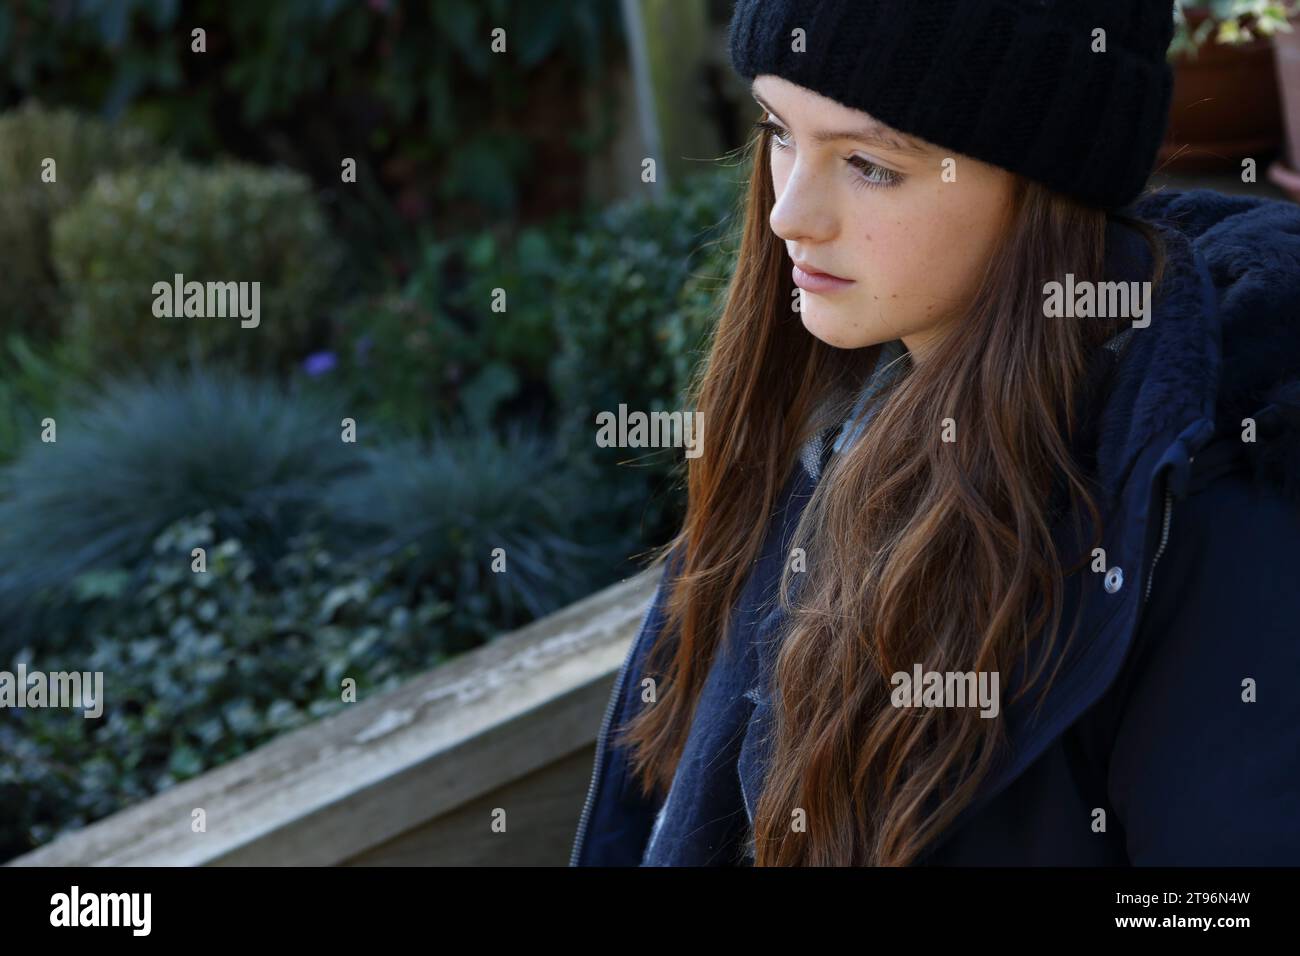 Girl sitting on step wearing woolly hat and coat and scarf trying to keep warm with plants in background Stock Photo